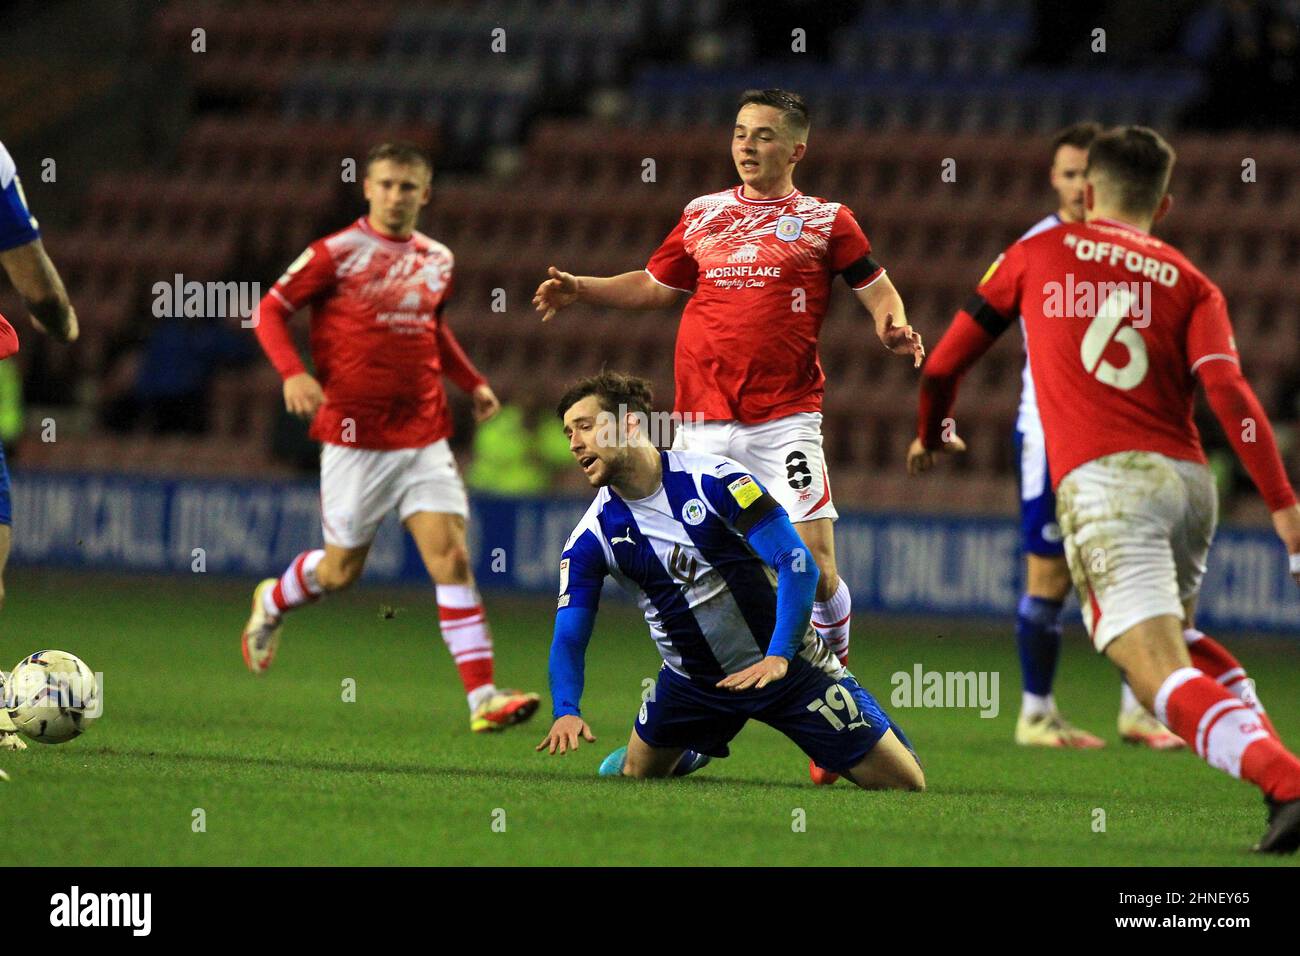 Wigan, UK. 15th Feb, 2022. Callum Lang of Wigan Athletic during the Sky Bet League One match between Wigan Athletic and Crewe Alexandra at DW Stadium on February 15th 2022 in Wigan, England. (Photo by Tony Taylor/phcimages.com) Credit: PHC Images/Alamy Live News Stock Photo